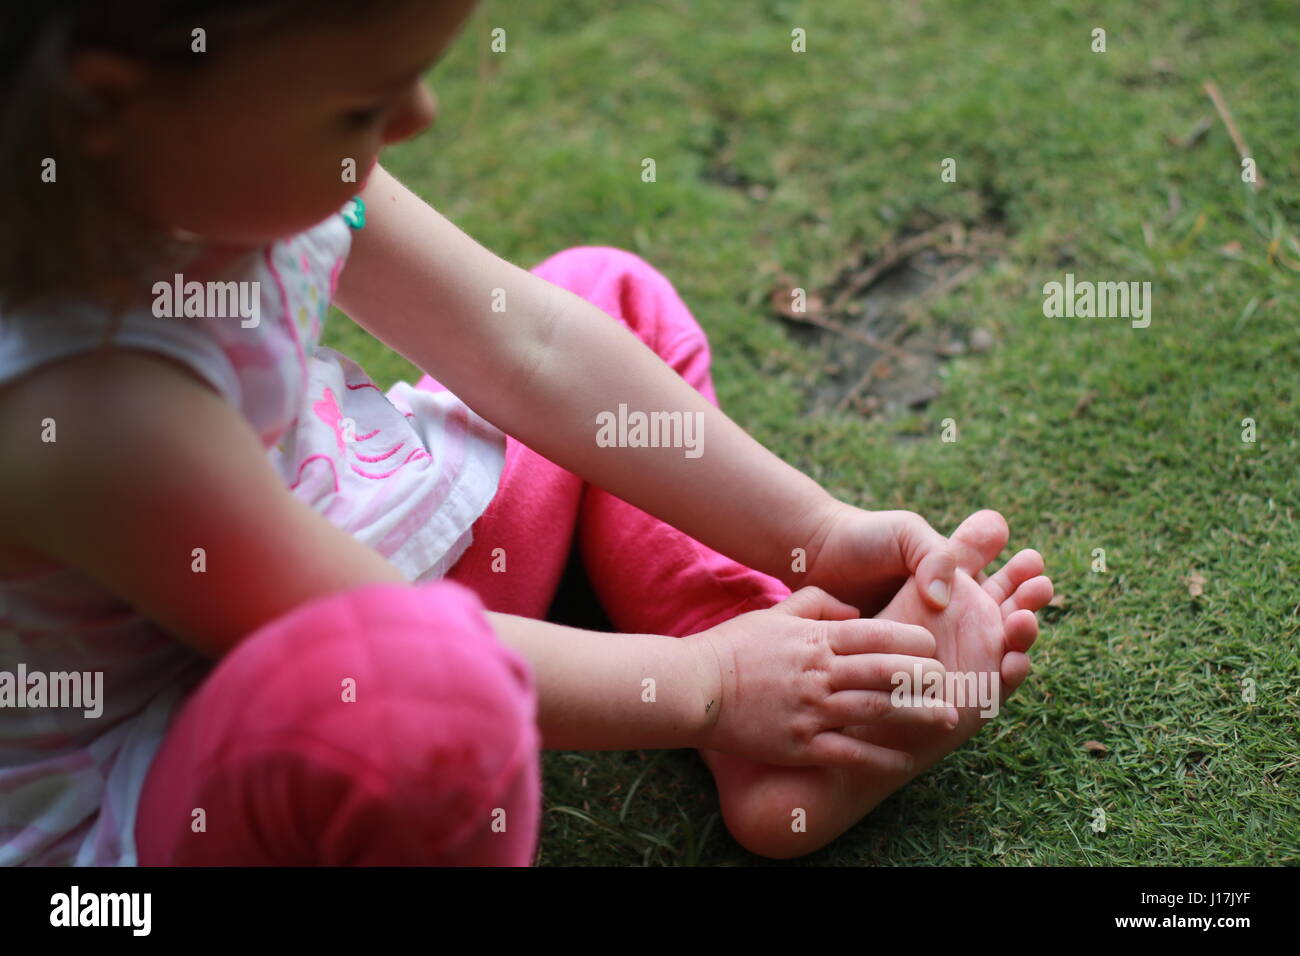 young girl inspecting the sole of her foot sitting barefoot on grass Stock Photo